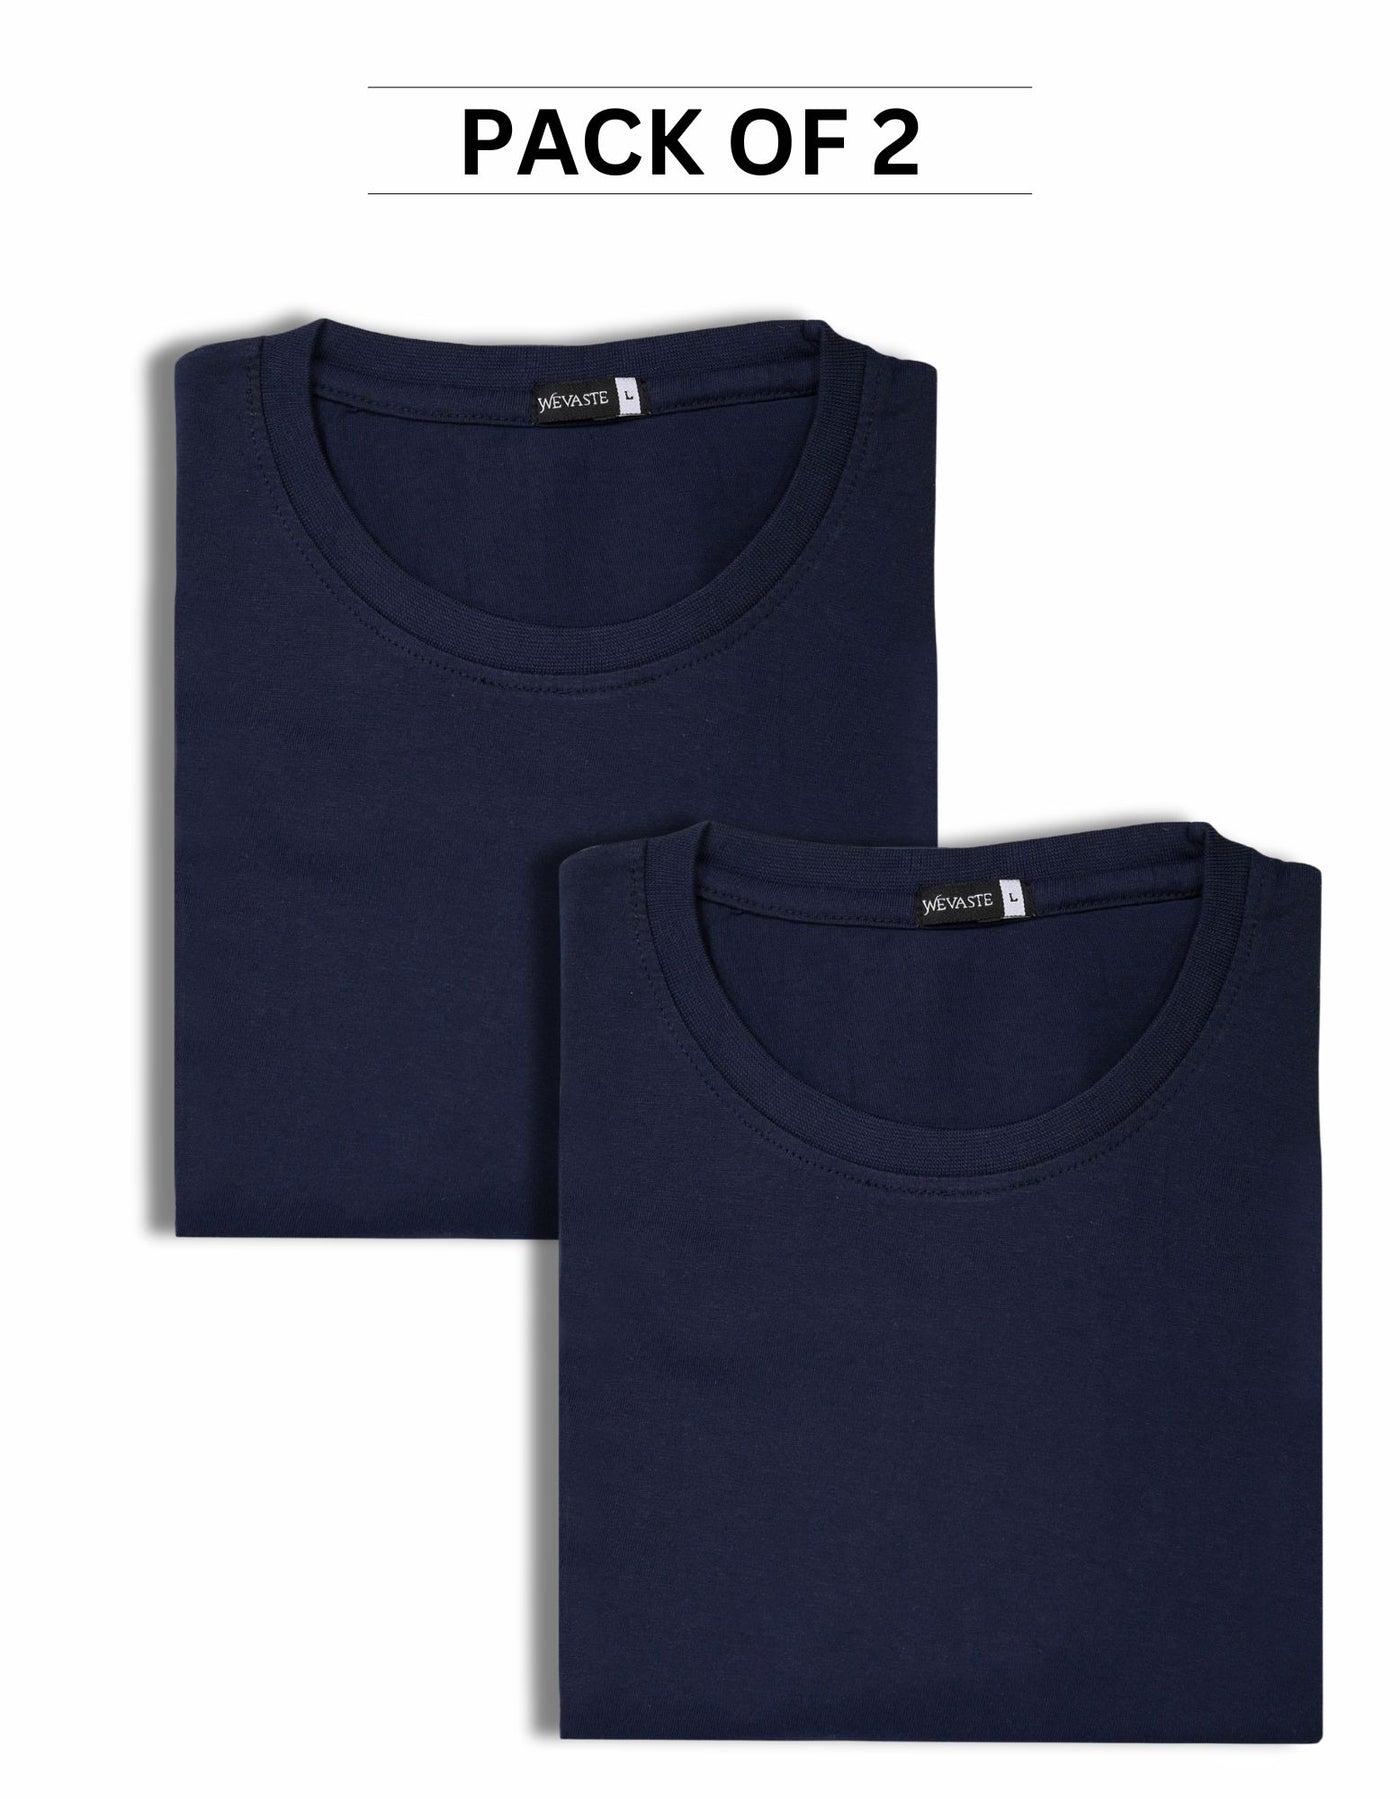 Blue Pack Of 2 T-shirts